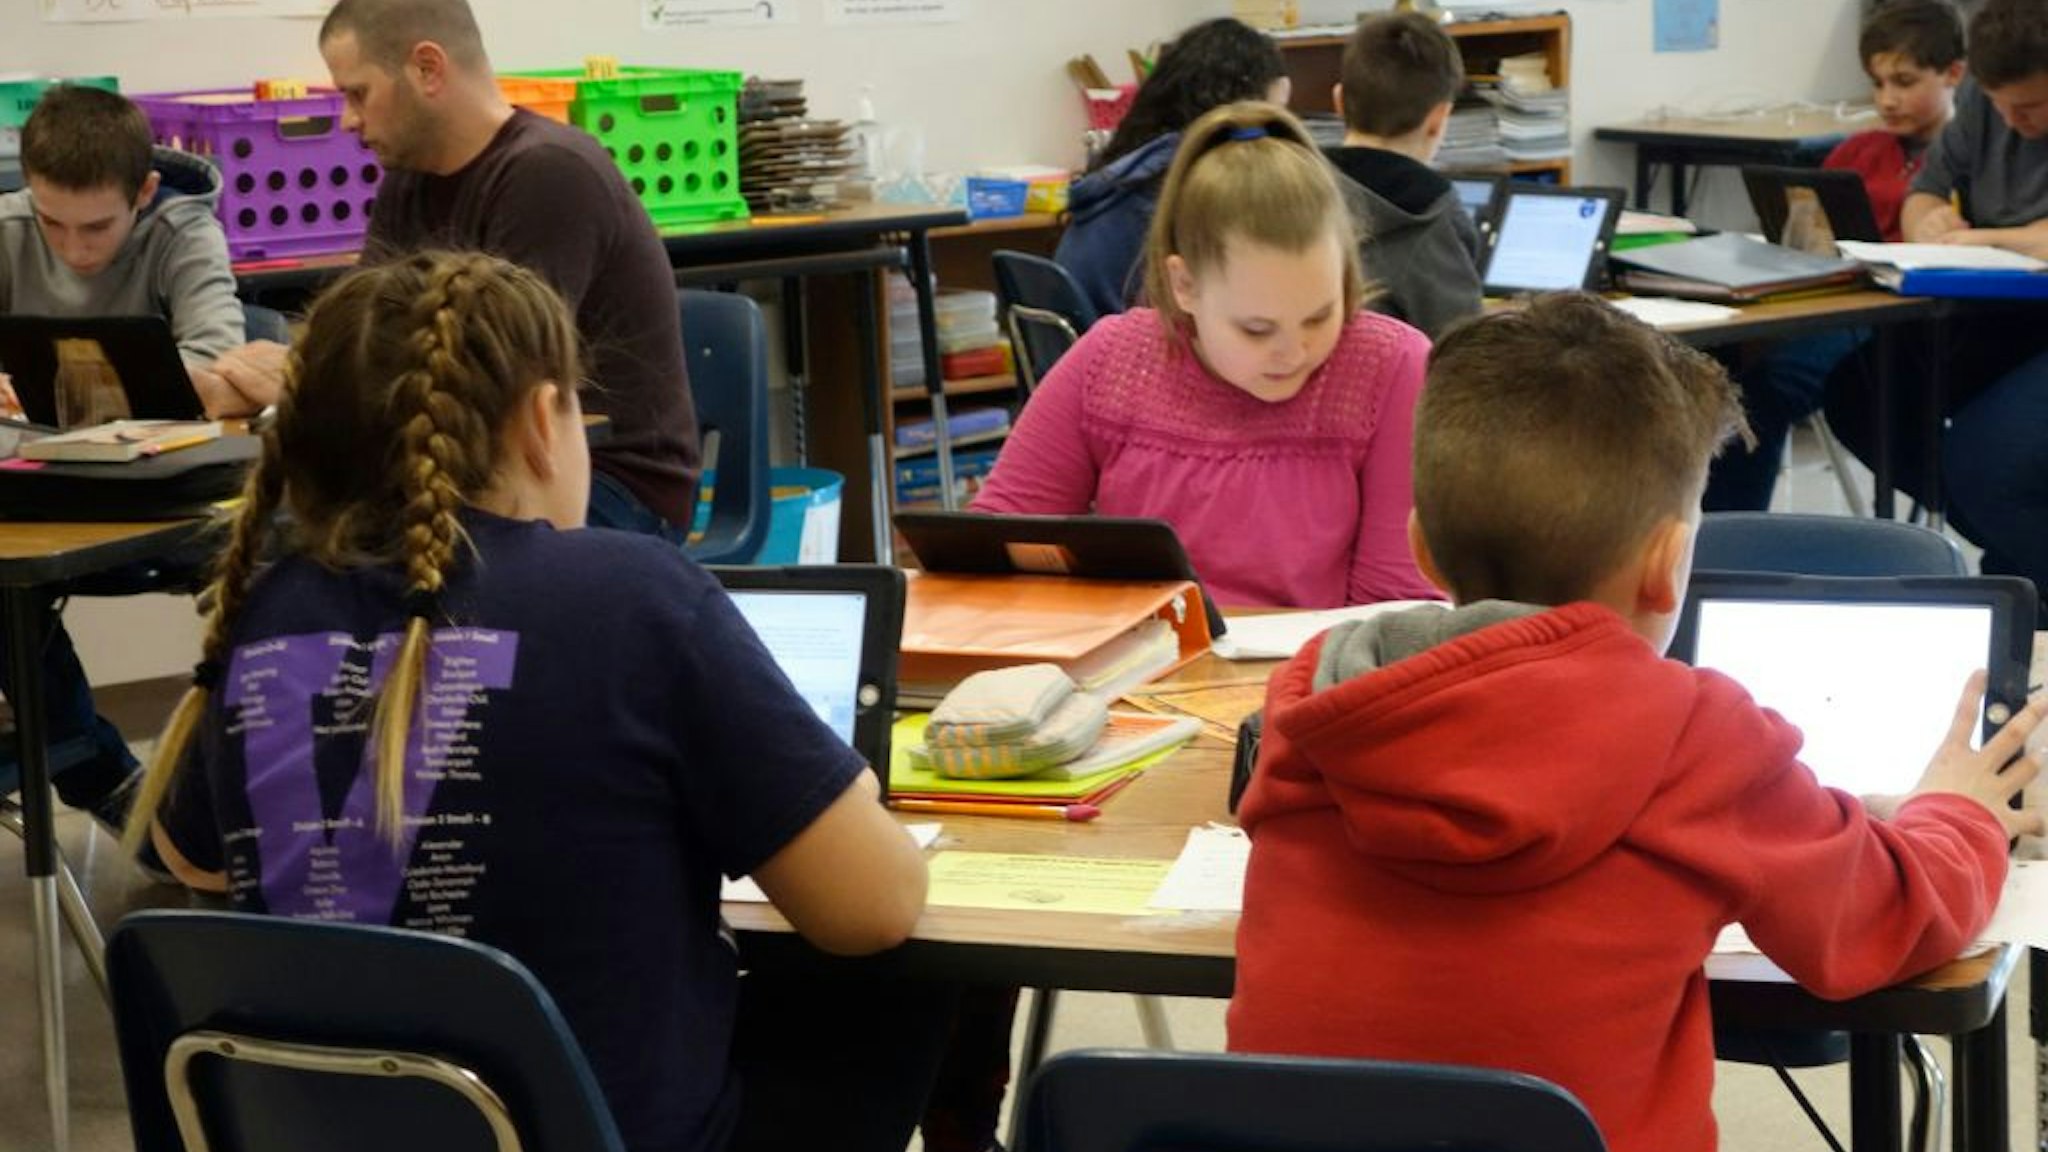 Students and Teacher Working in Social Studies Classroom, Wellsville, New York